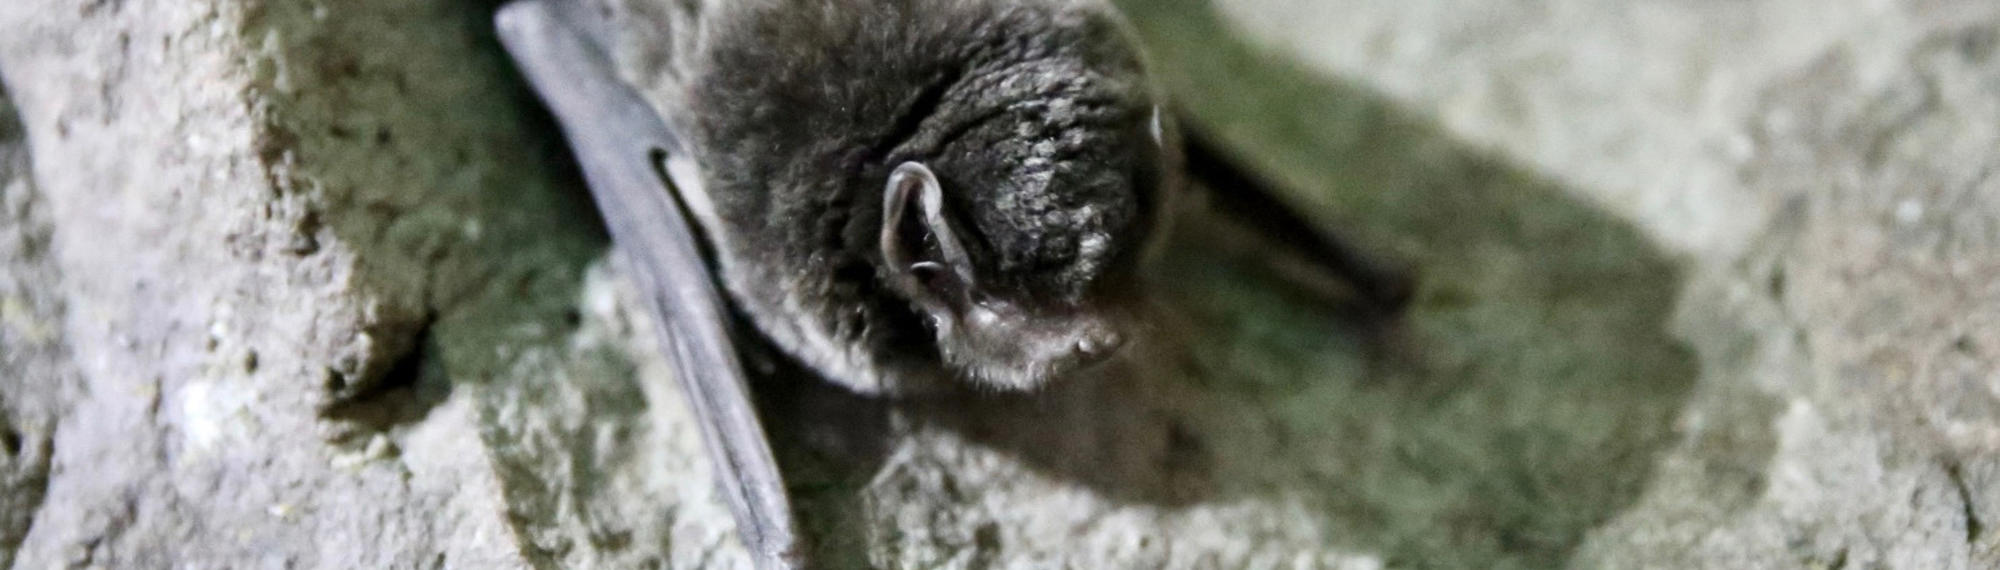 Close-up of a small black bat with wings drawn in tight, resting on a rocky surface